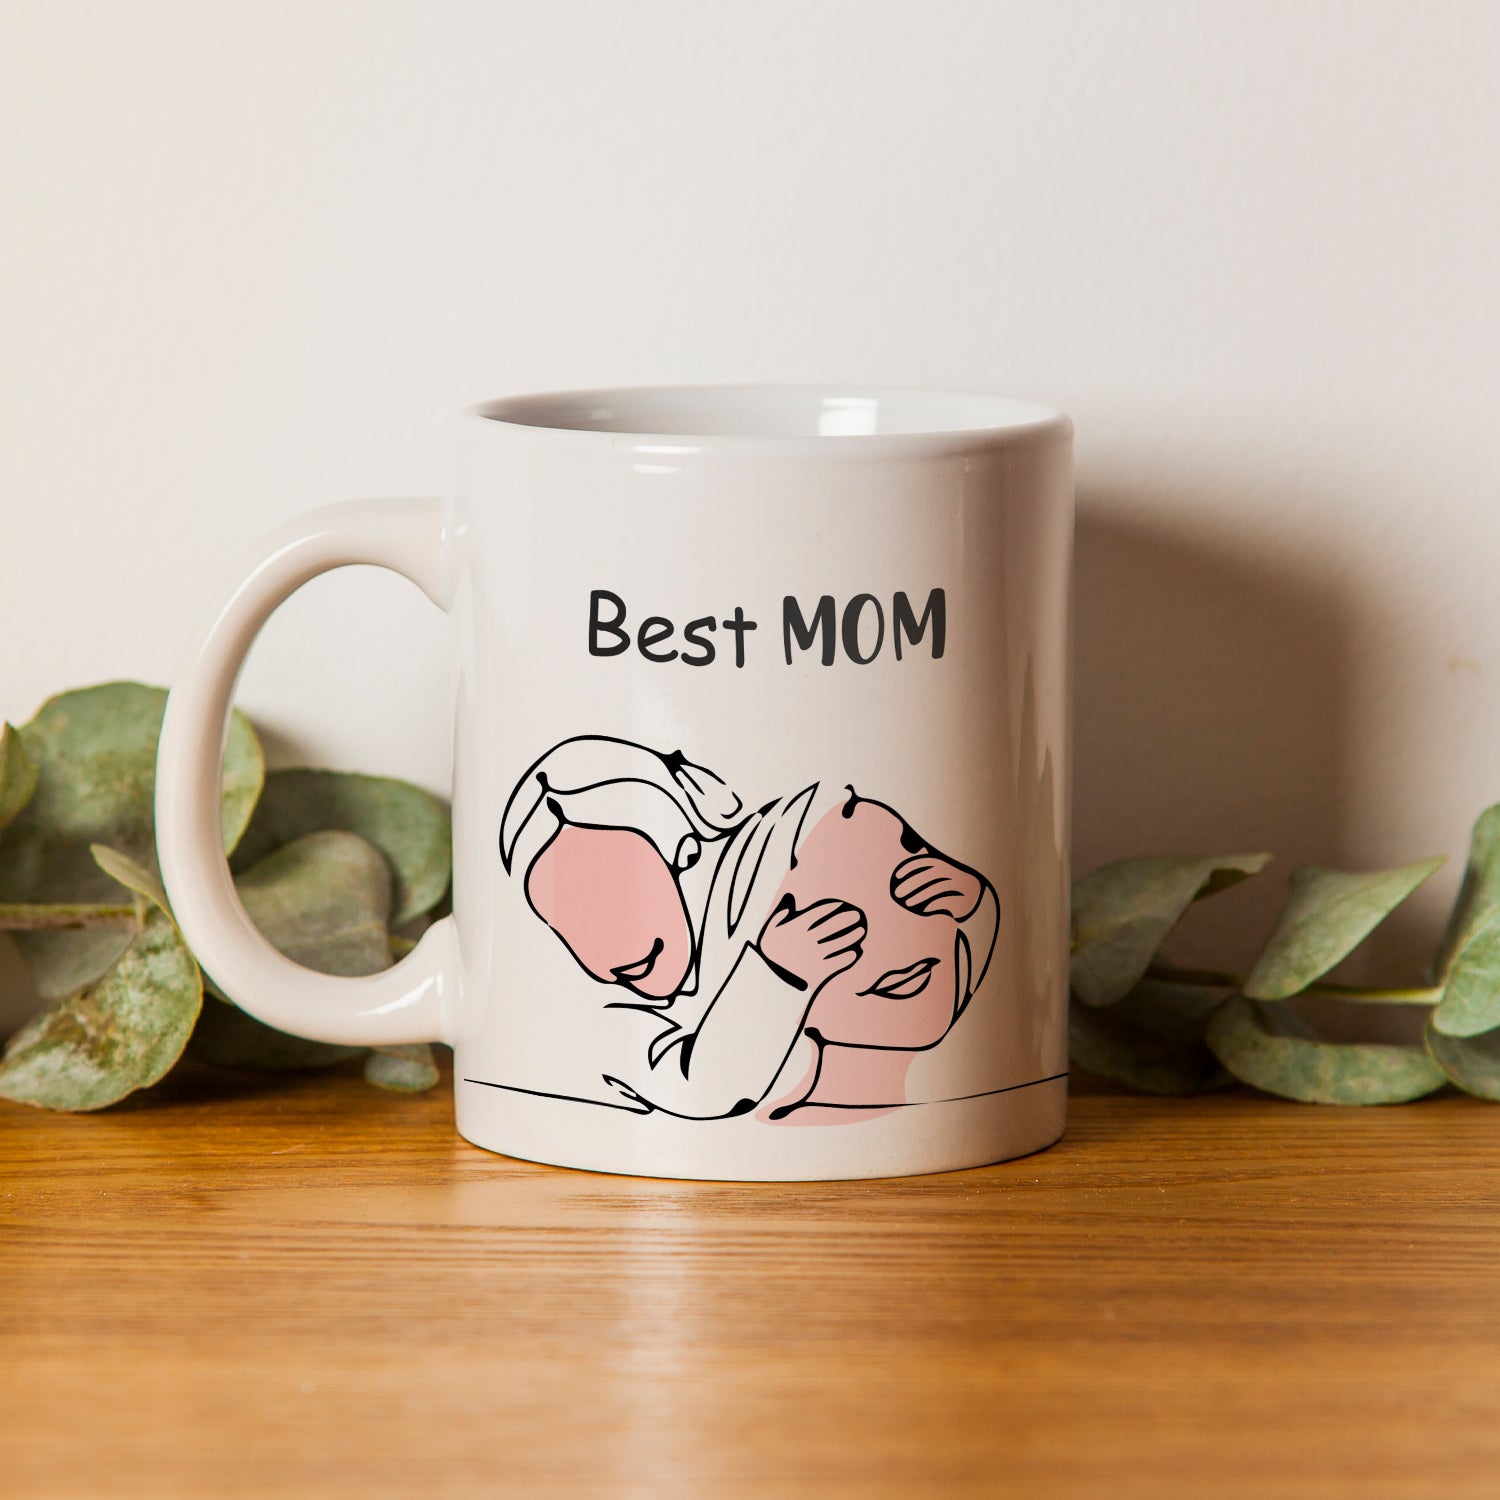 "Best MOM" Mother's Day theme Ceramic Coffee Mugs 1